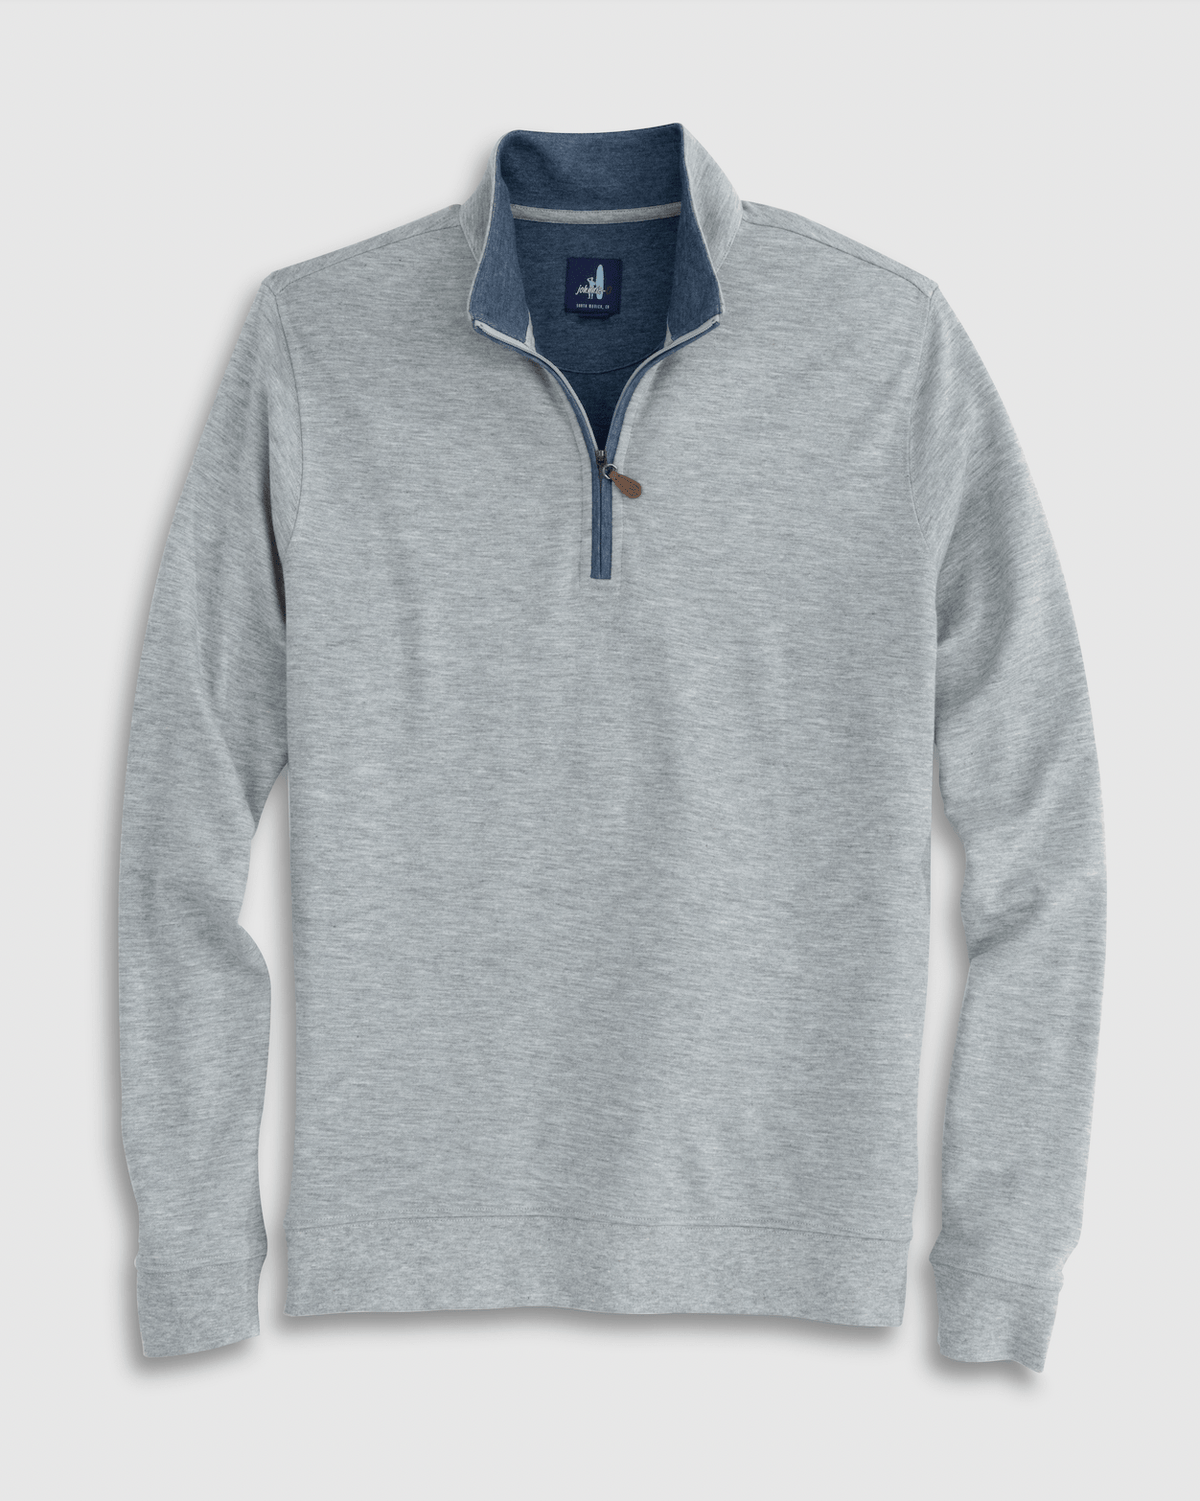 Johnnie-O Sully 1/4 Zip Pullover Light Grey